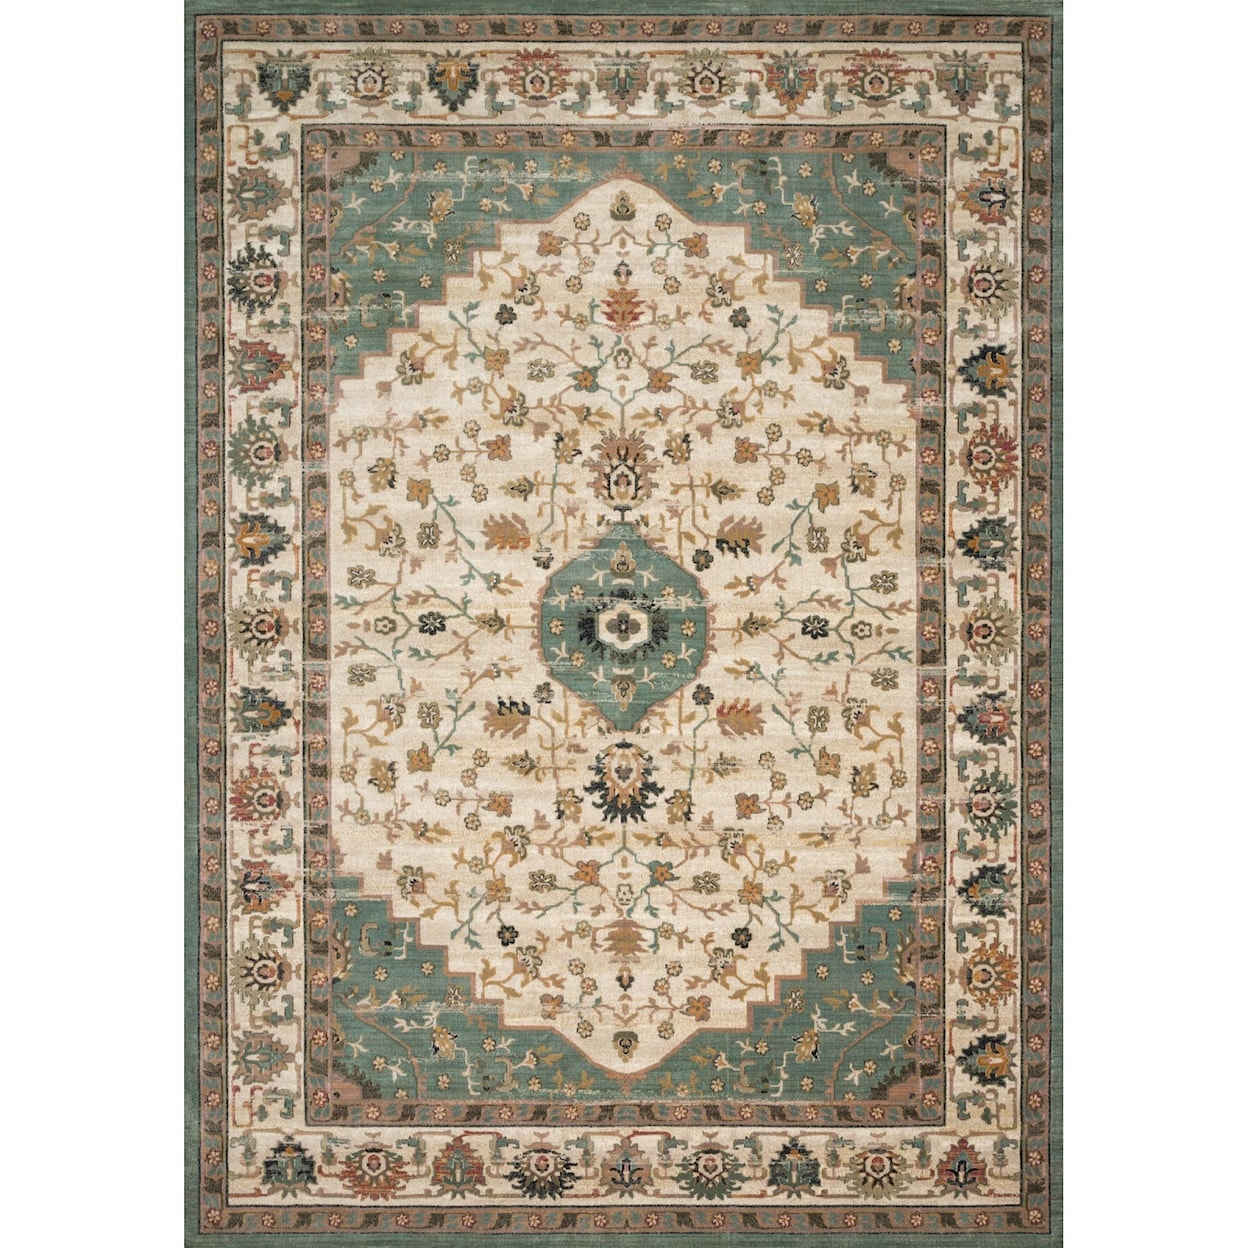 Magnolia Home by Joanna Gaines for Loloi Evie 6'-4" x 9'-2" Rug